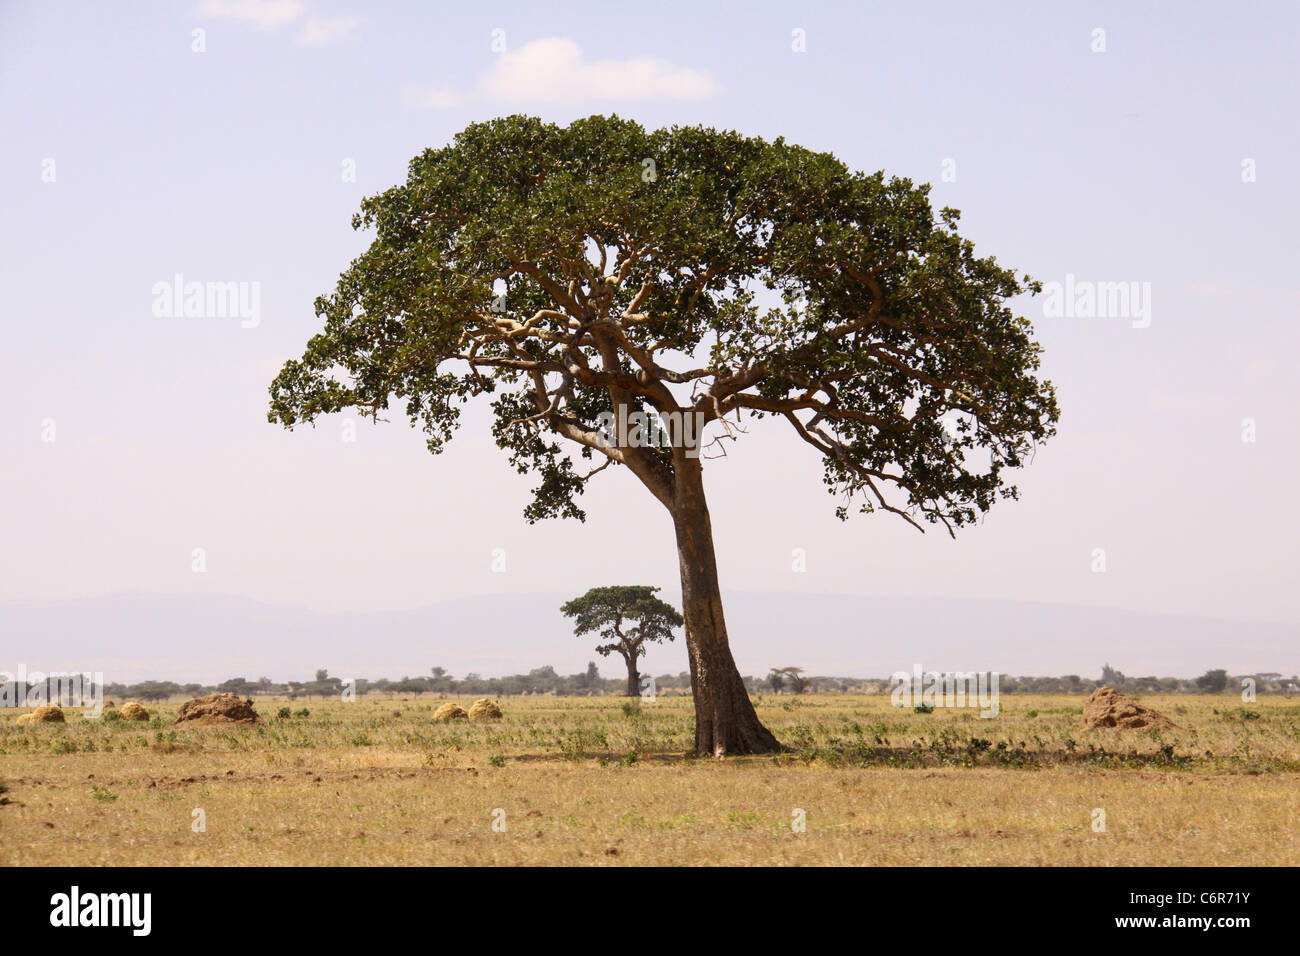 A scenic view of the Ethiopian countryside with a lone fig tree in the foreground Stock Photo